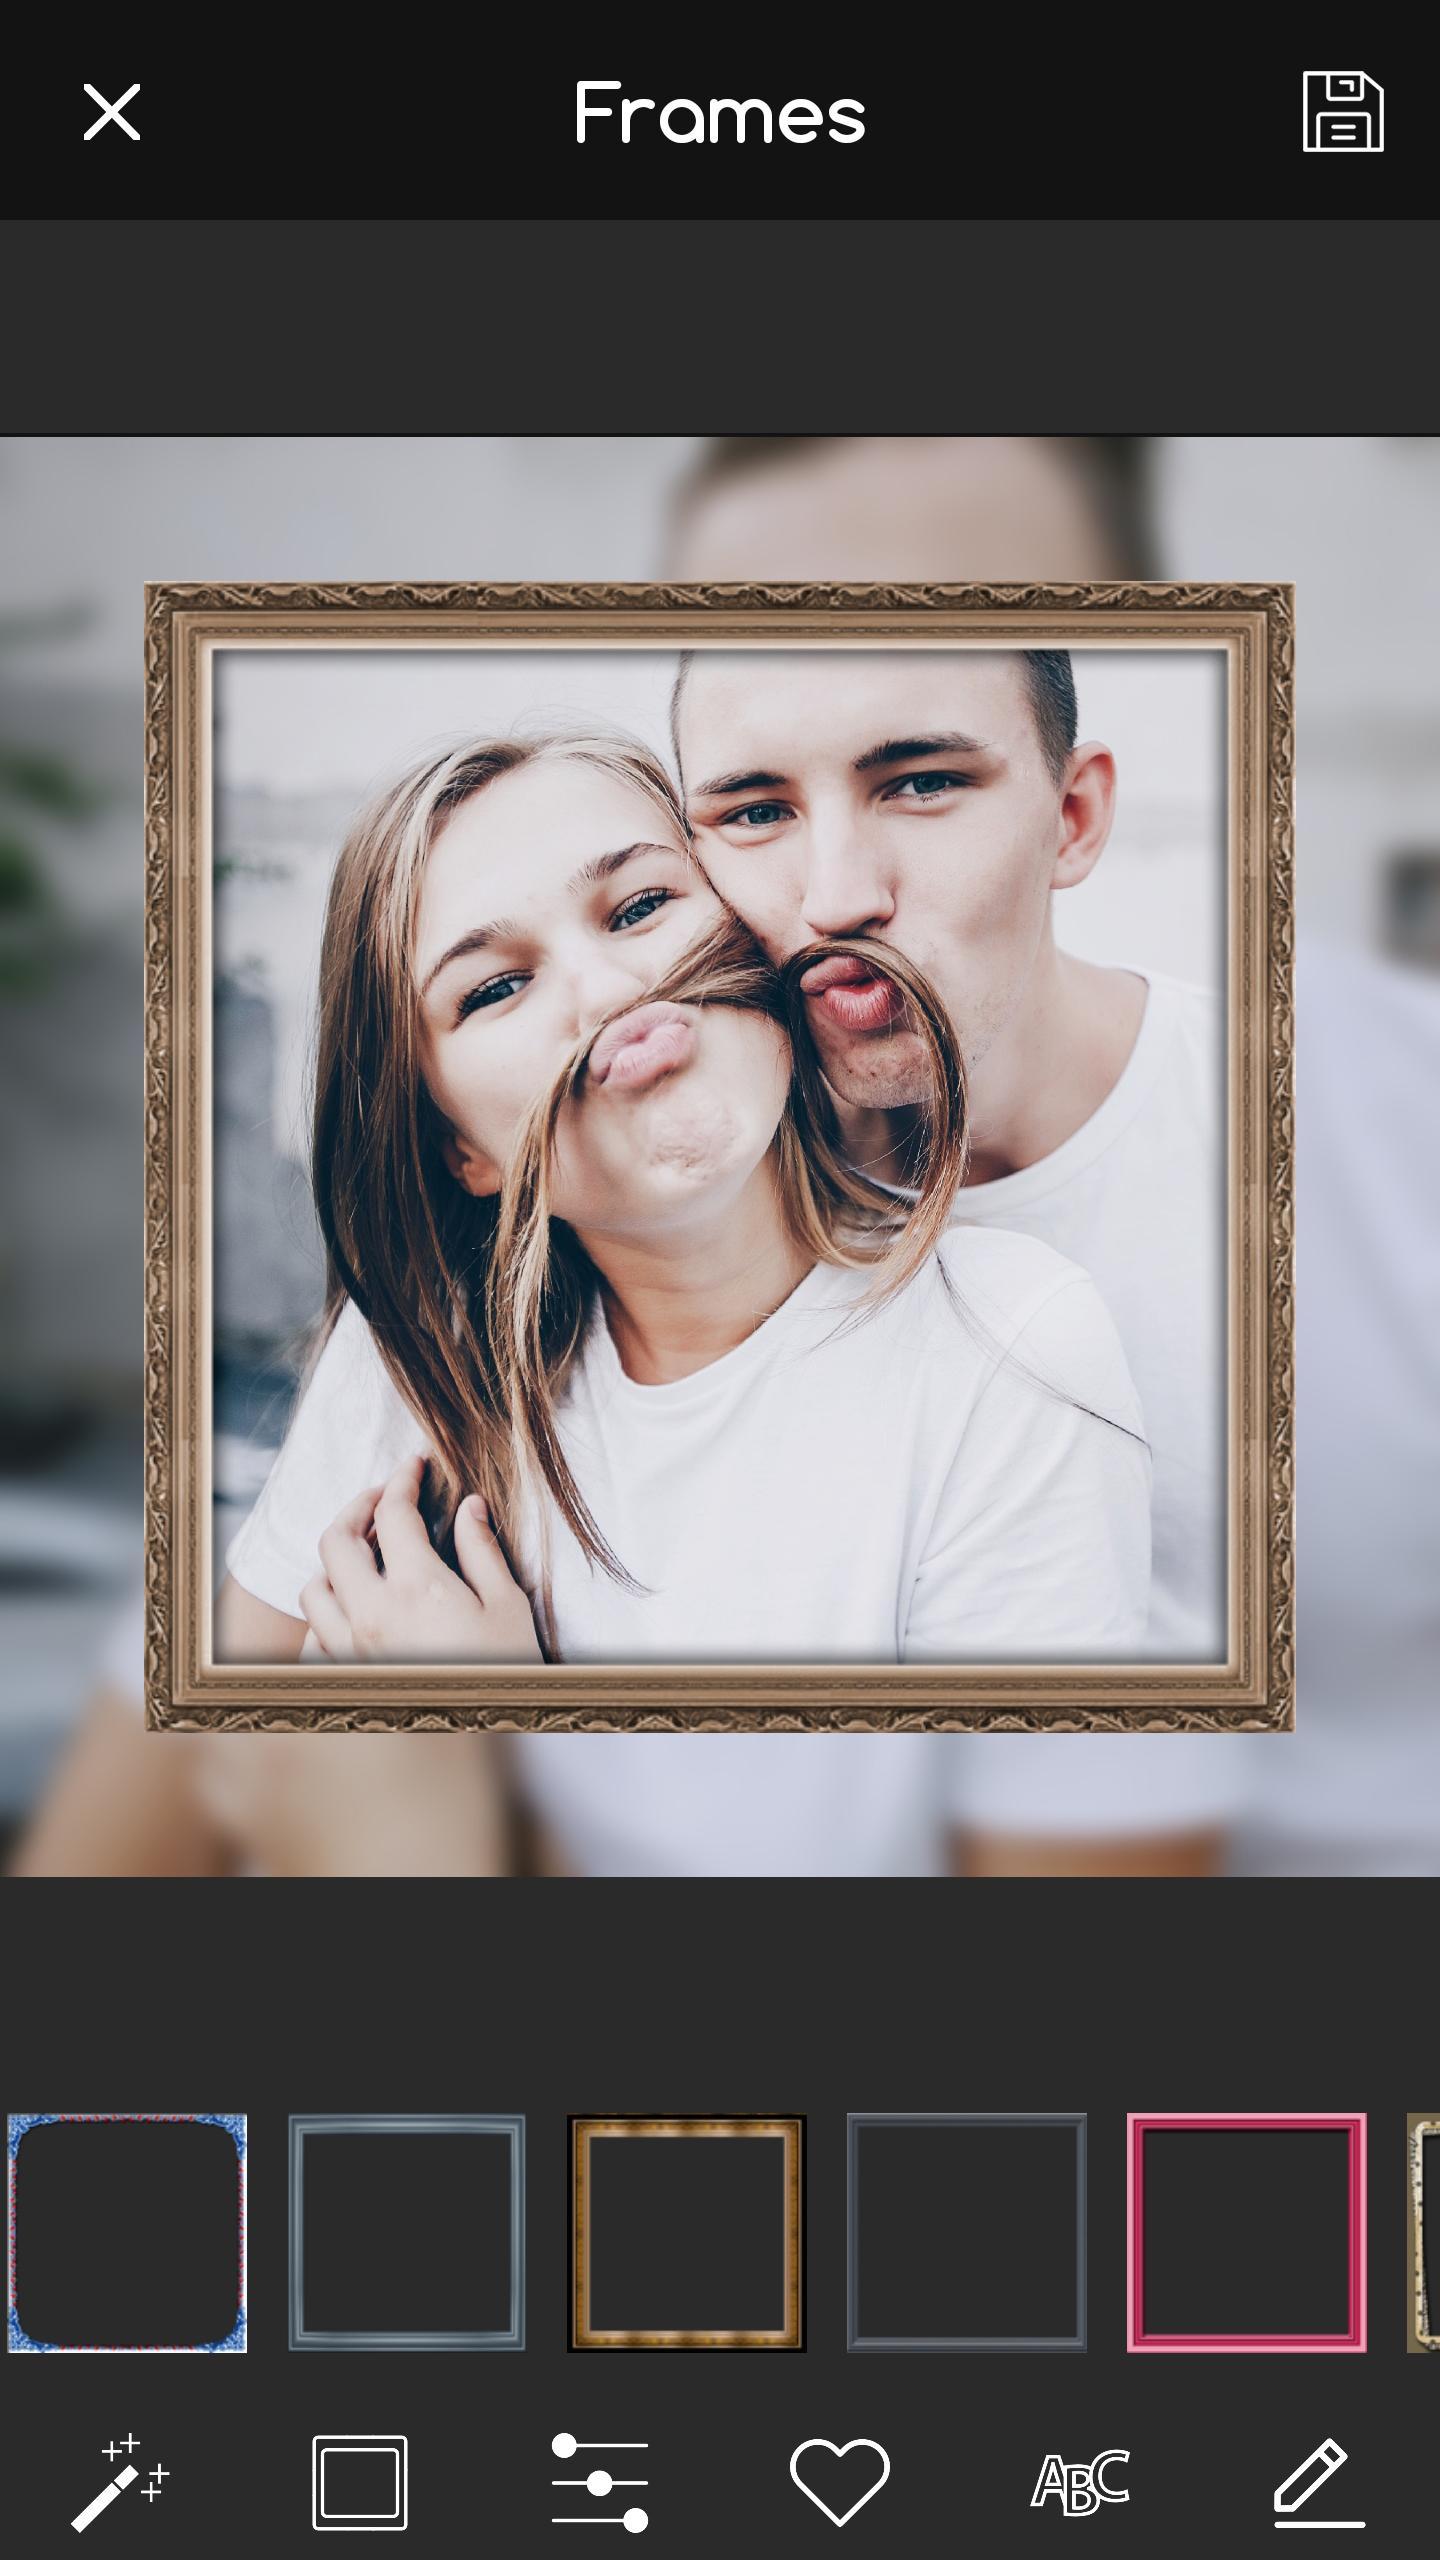 Blur Frame for Android - APK Download